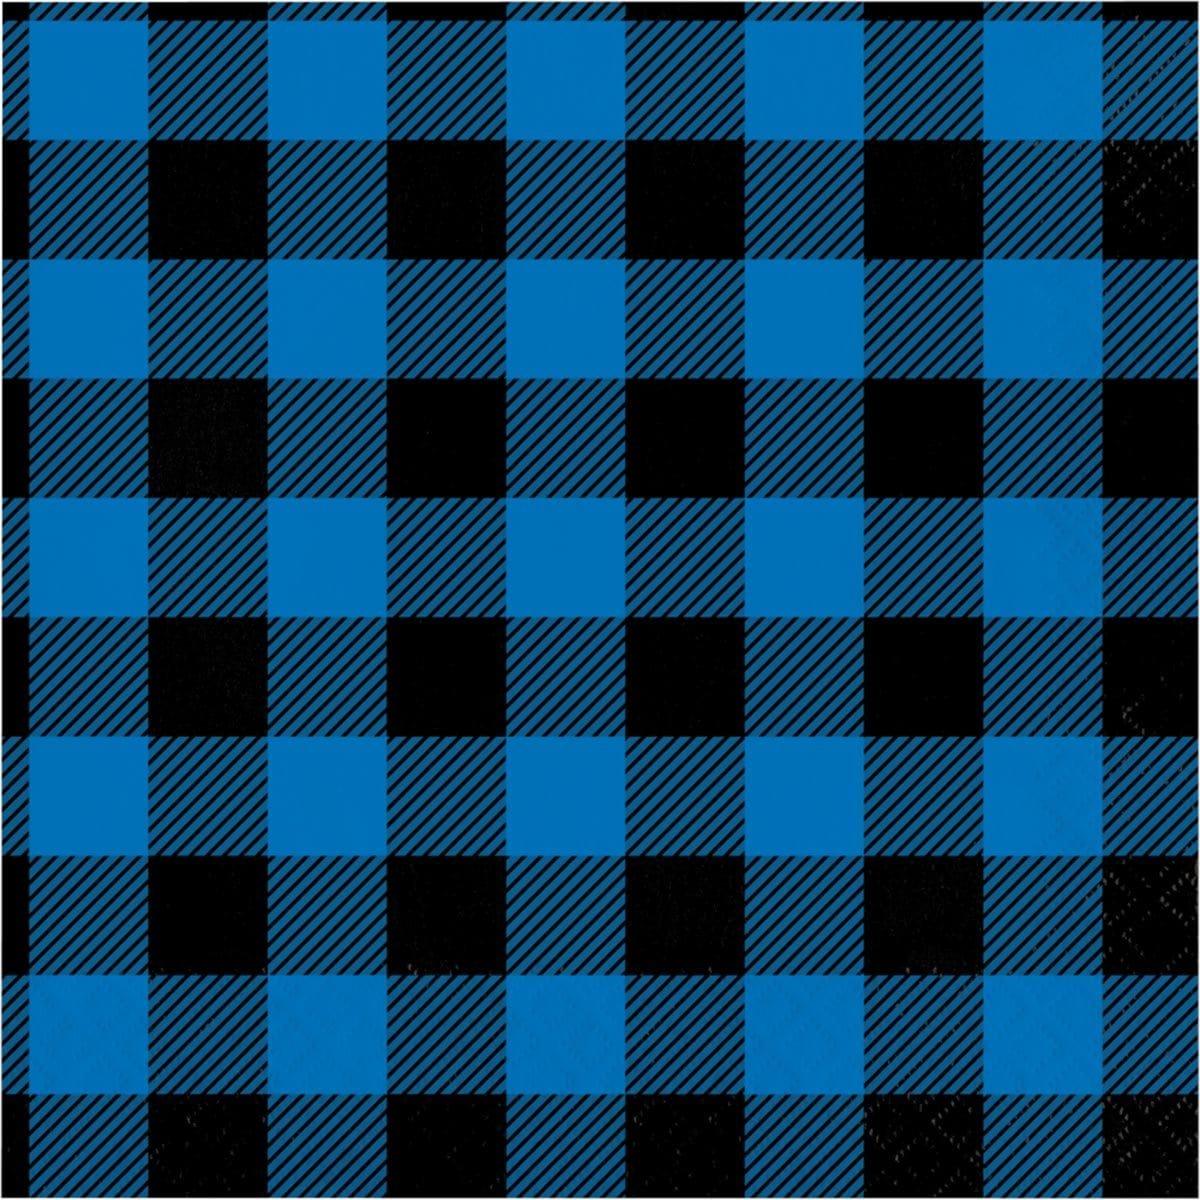 Buy Everyday Entertaining Blue Buffalo Plaid Lunch Napkins, 16 Count sold at Party Expert